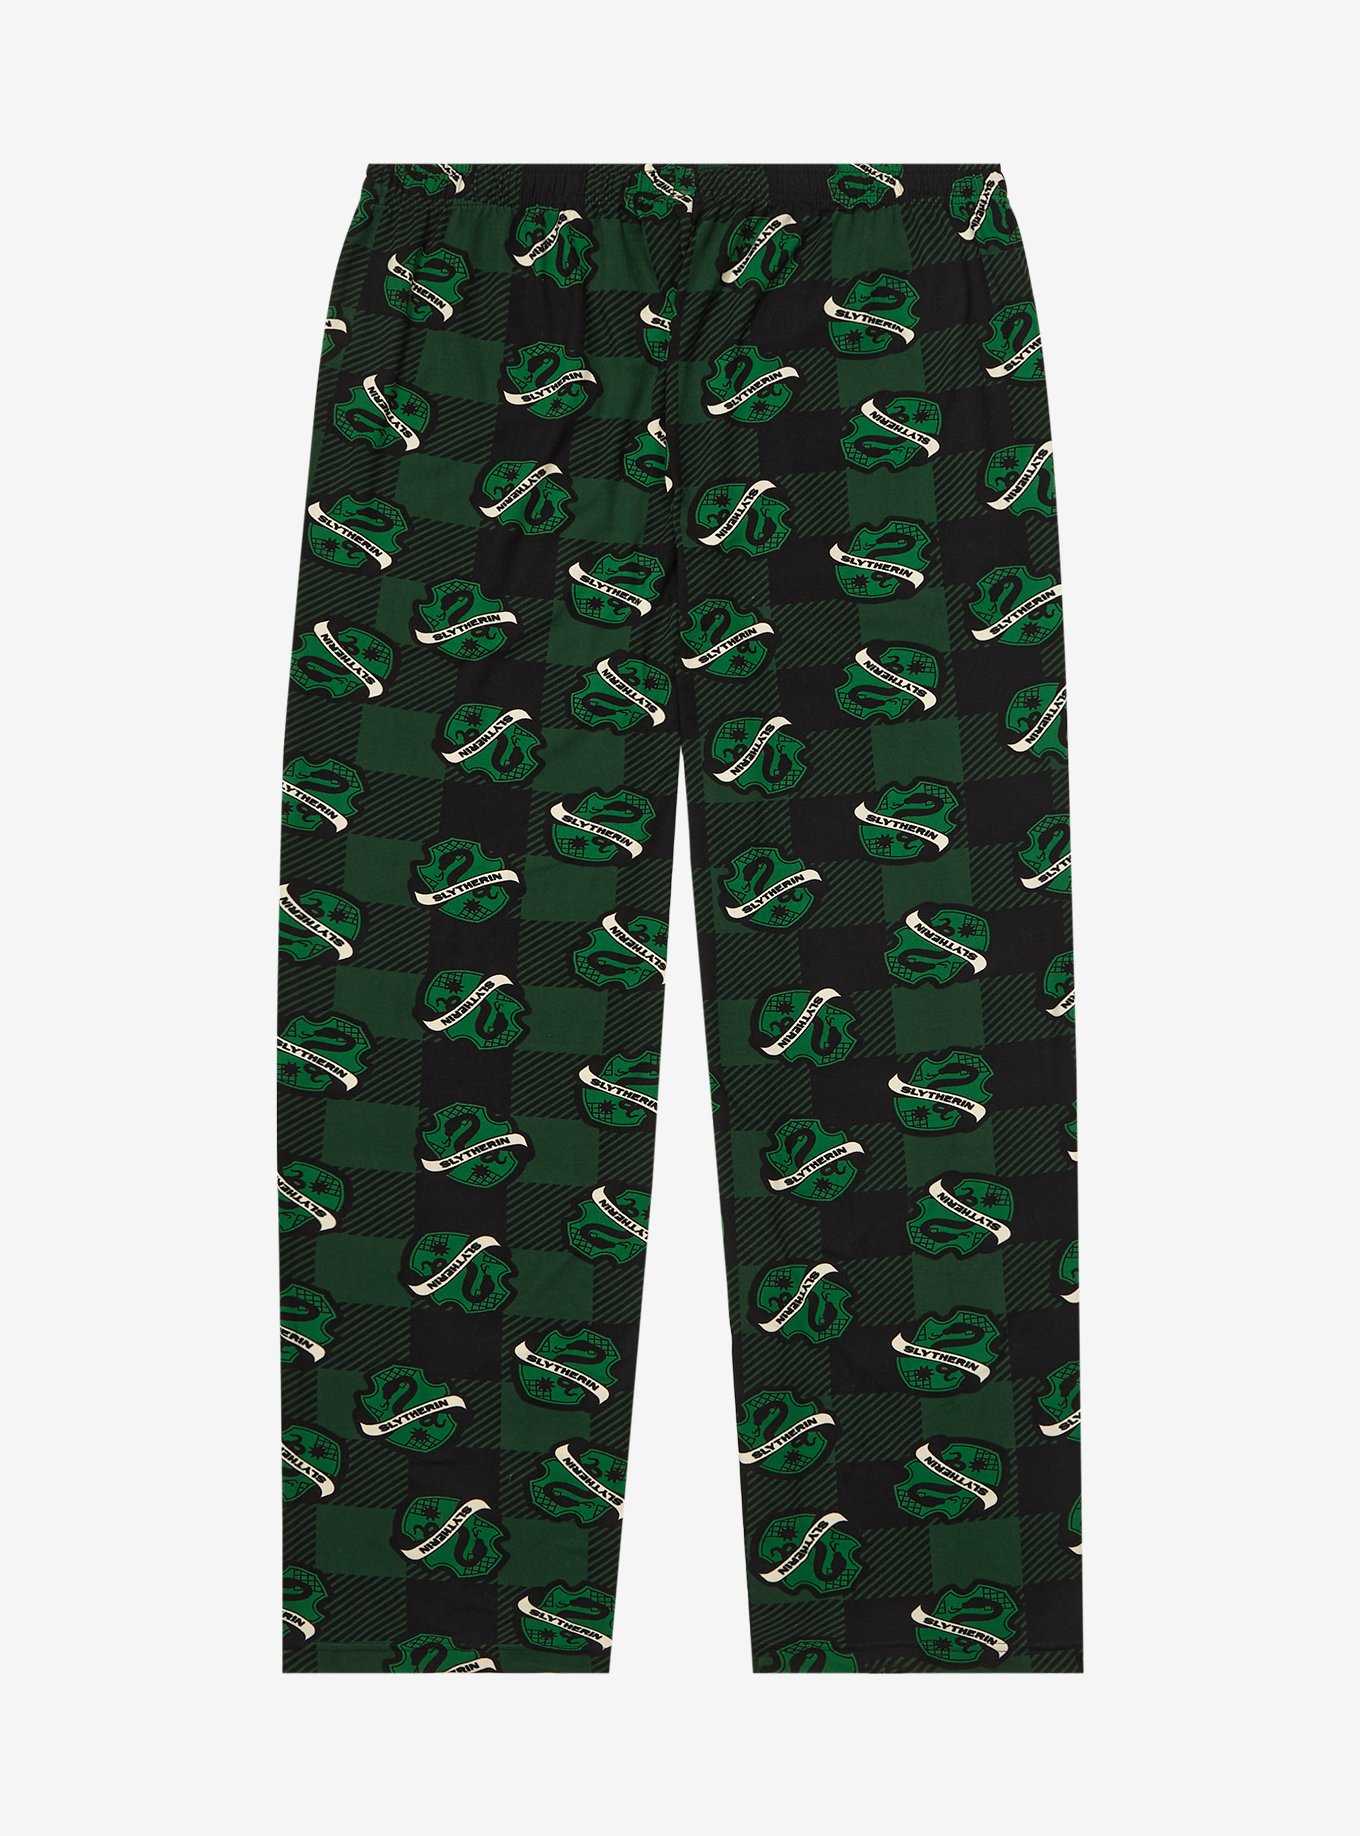 Harry Potter Plaid Slytherin Allover Print Plus Size Sleep Pants - BoxLunch Exclusive, , hi-res